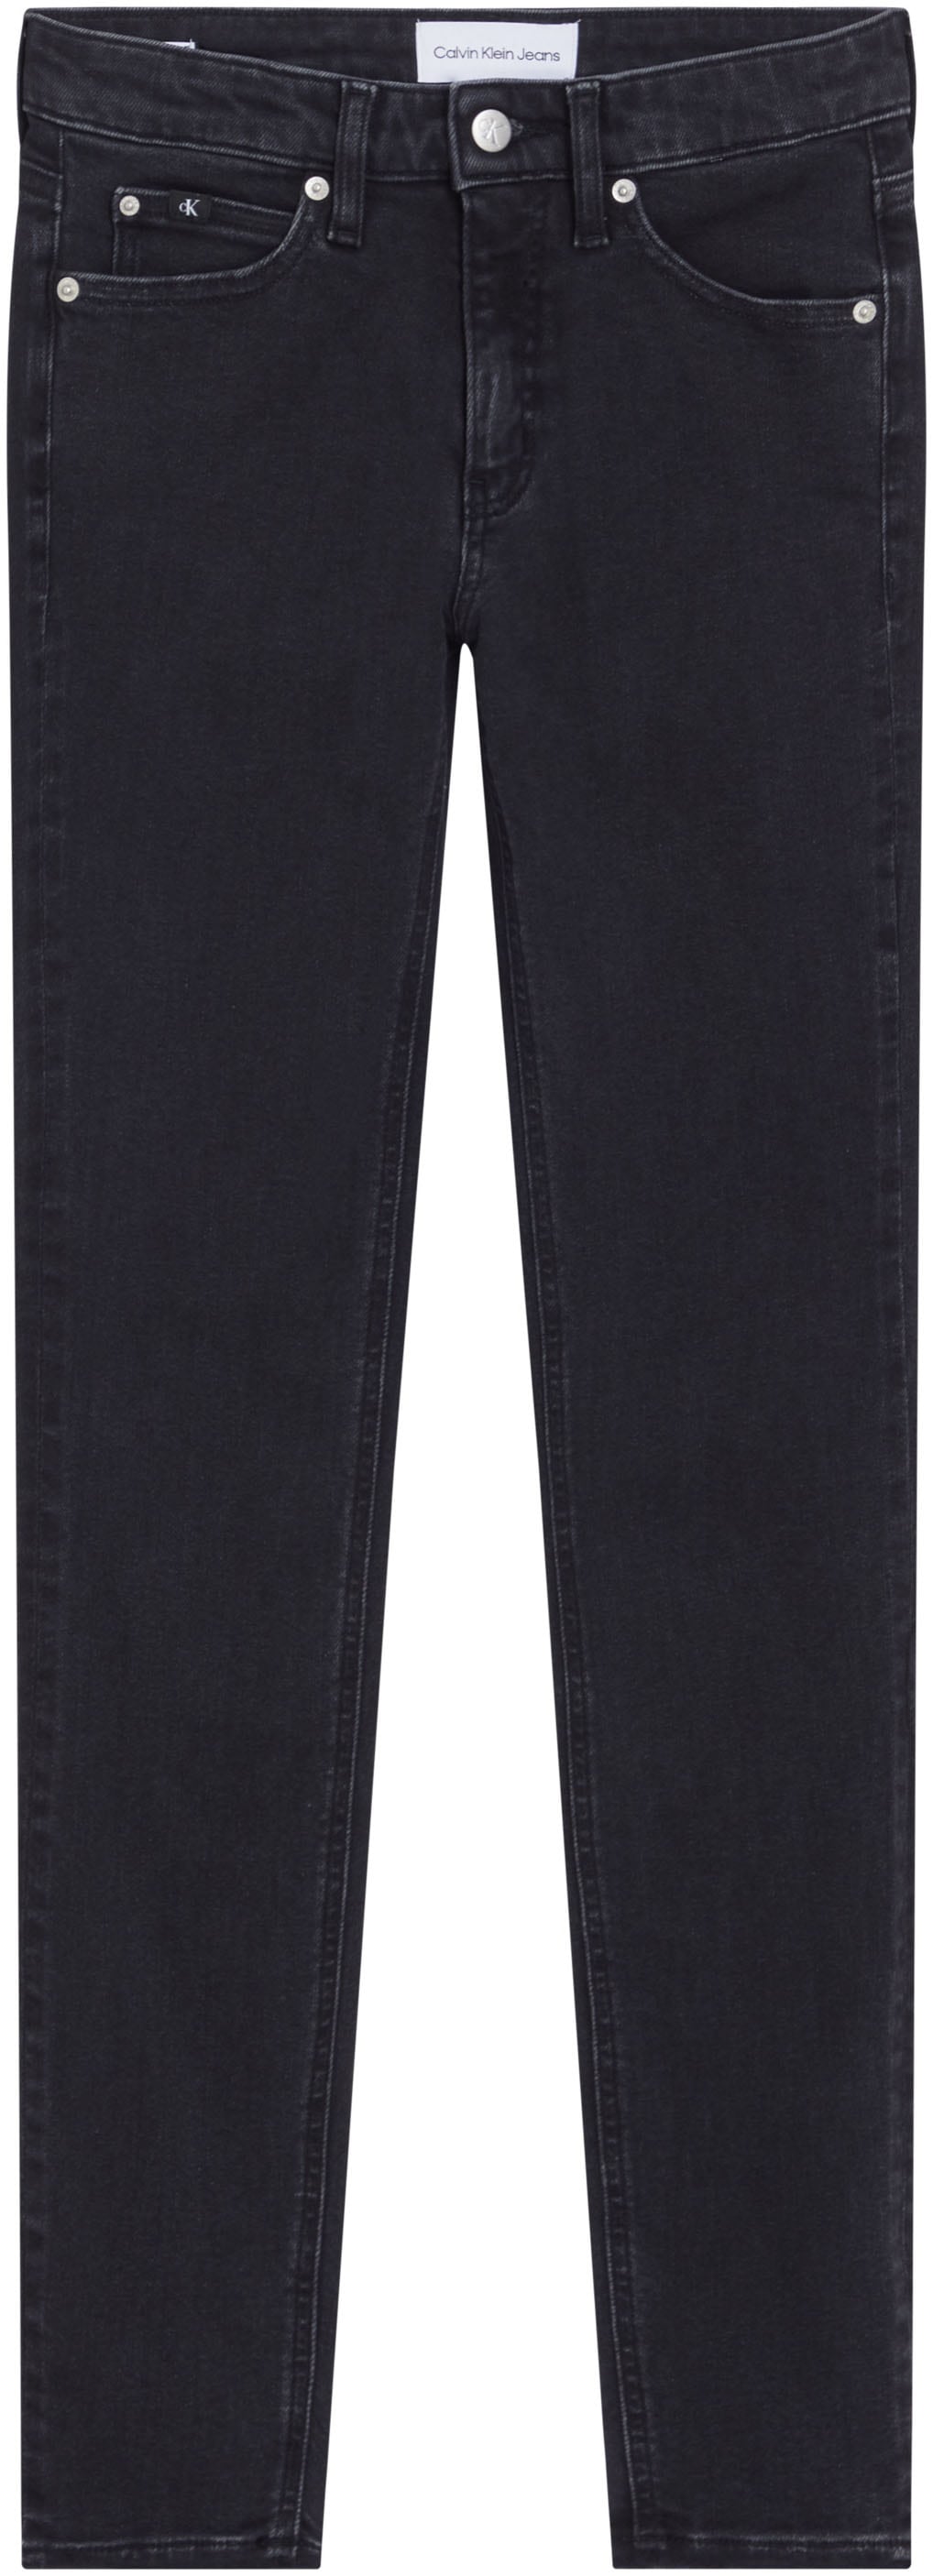 Calvin Klein Jeans Skinny-fit-Jeans »MID RISE SKINNY«, im 5-Pocket-Style